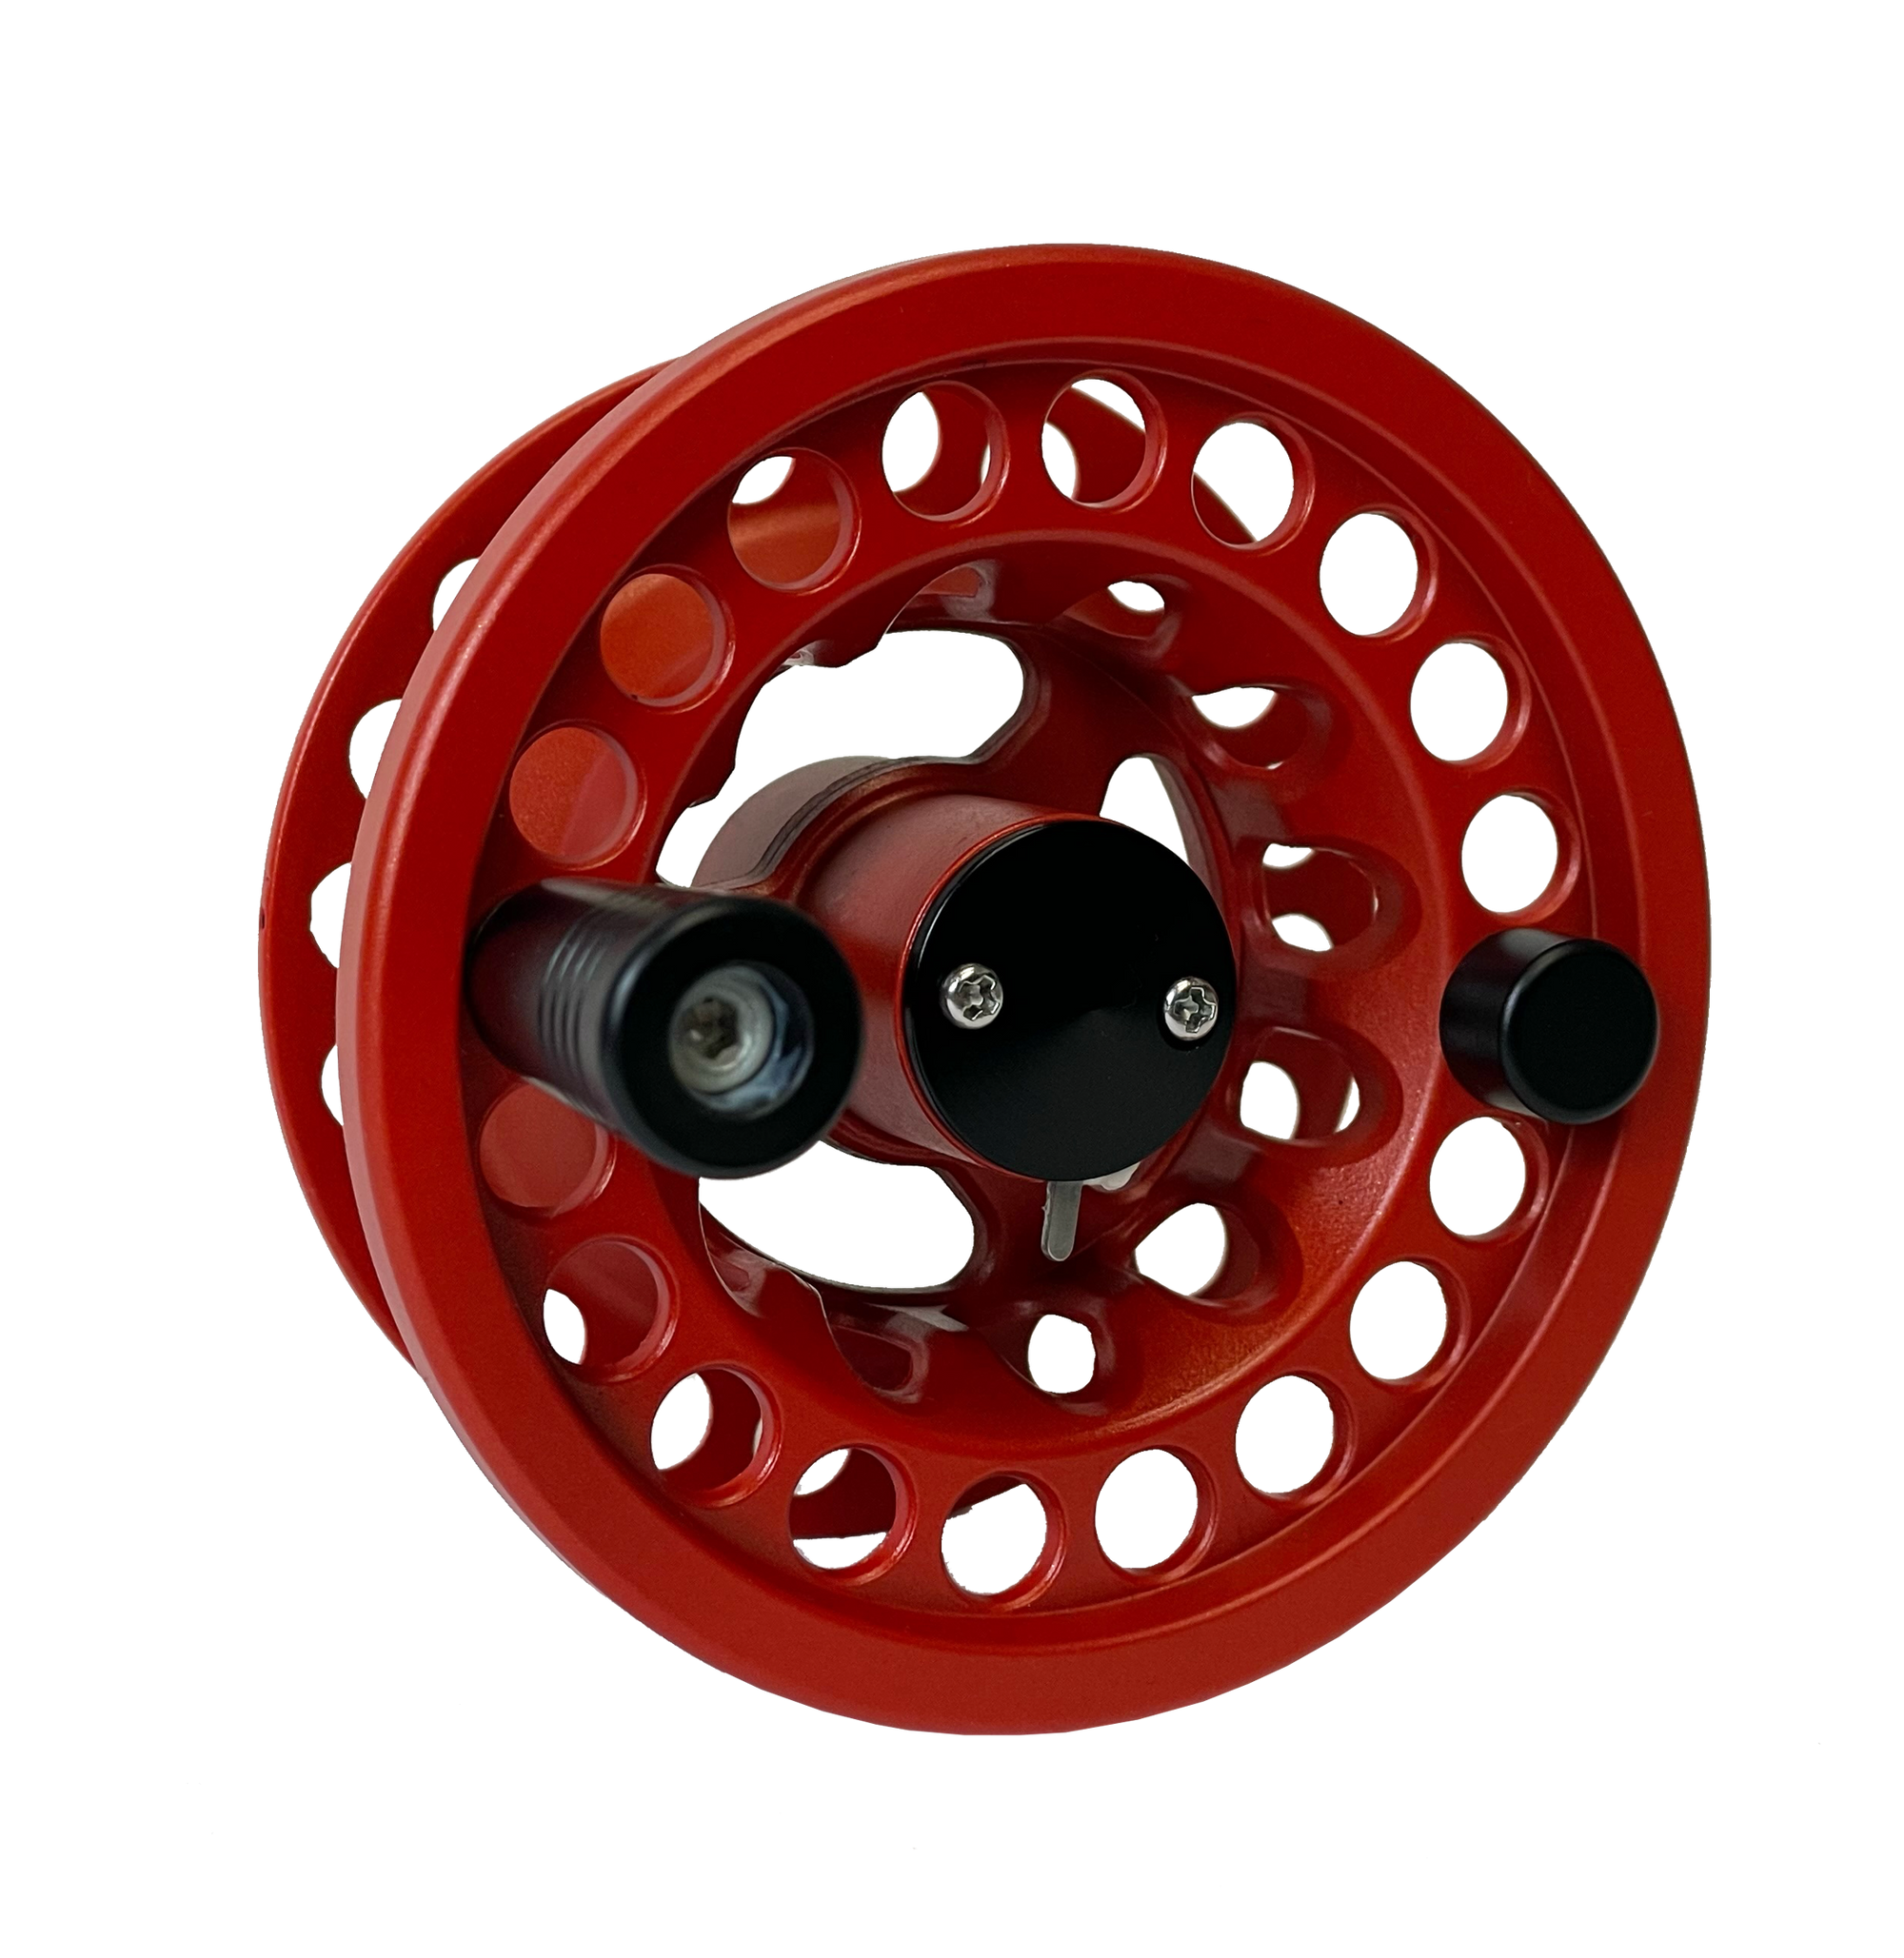 Original Cheeky® Tyro Fly Reel Discount Designs at a Steal